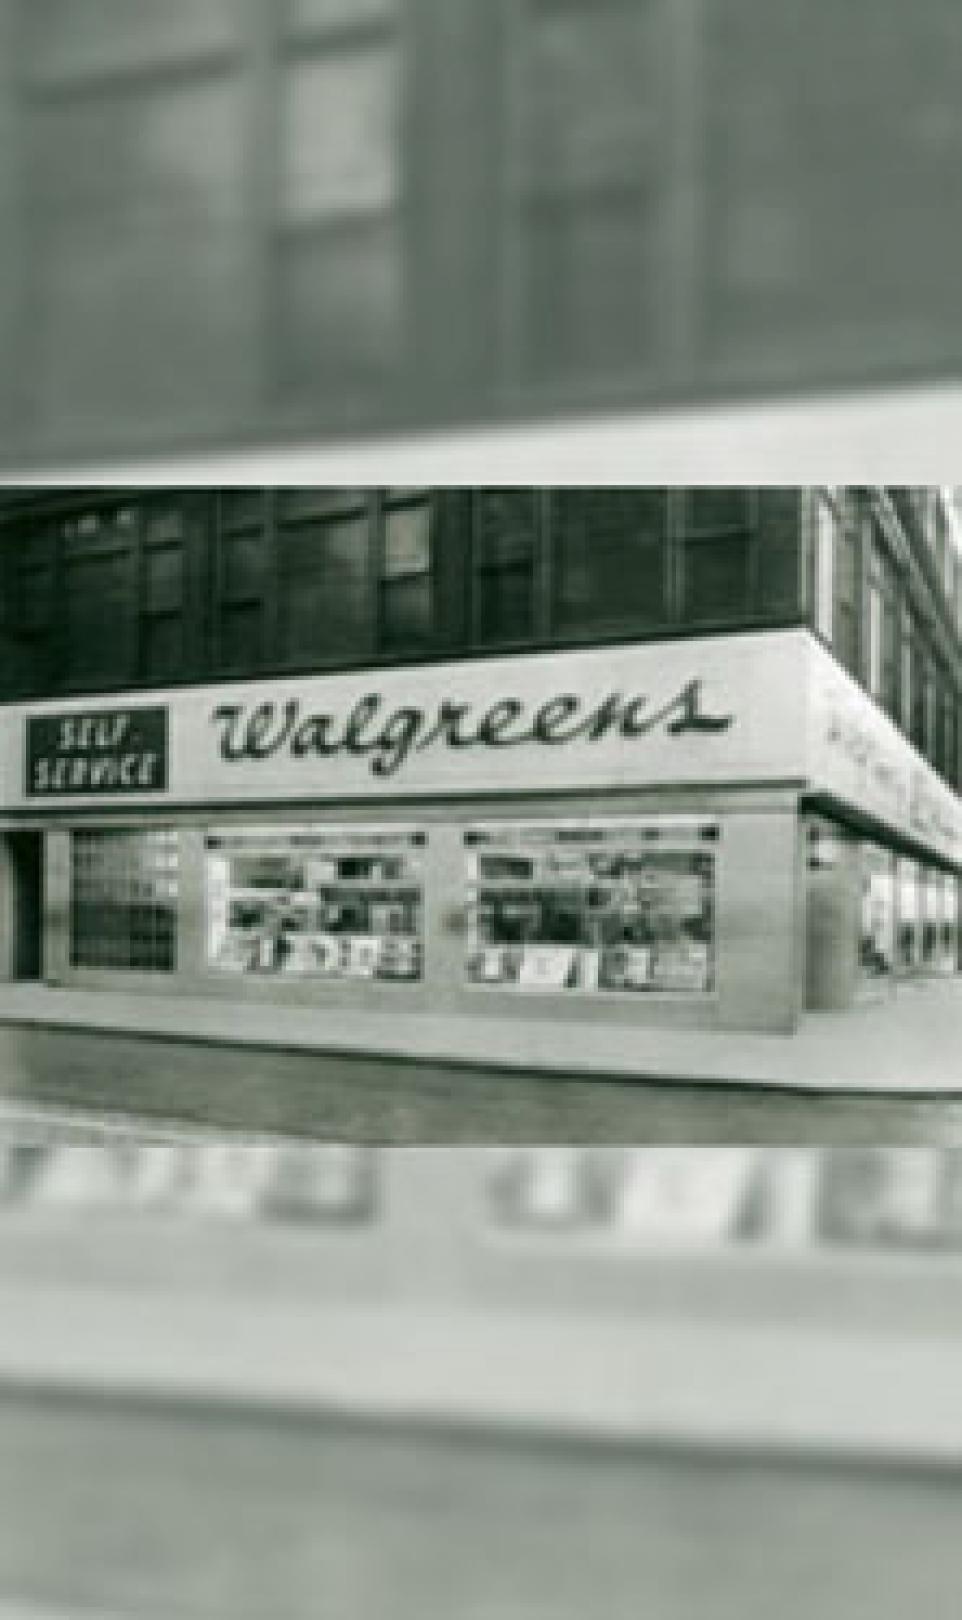 Storefront black and white photograph of a Walgreens self-service store